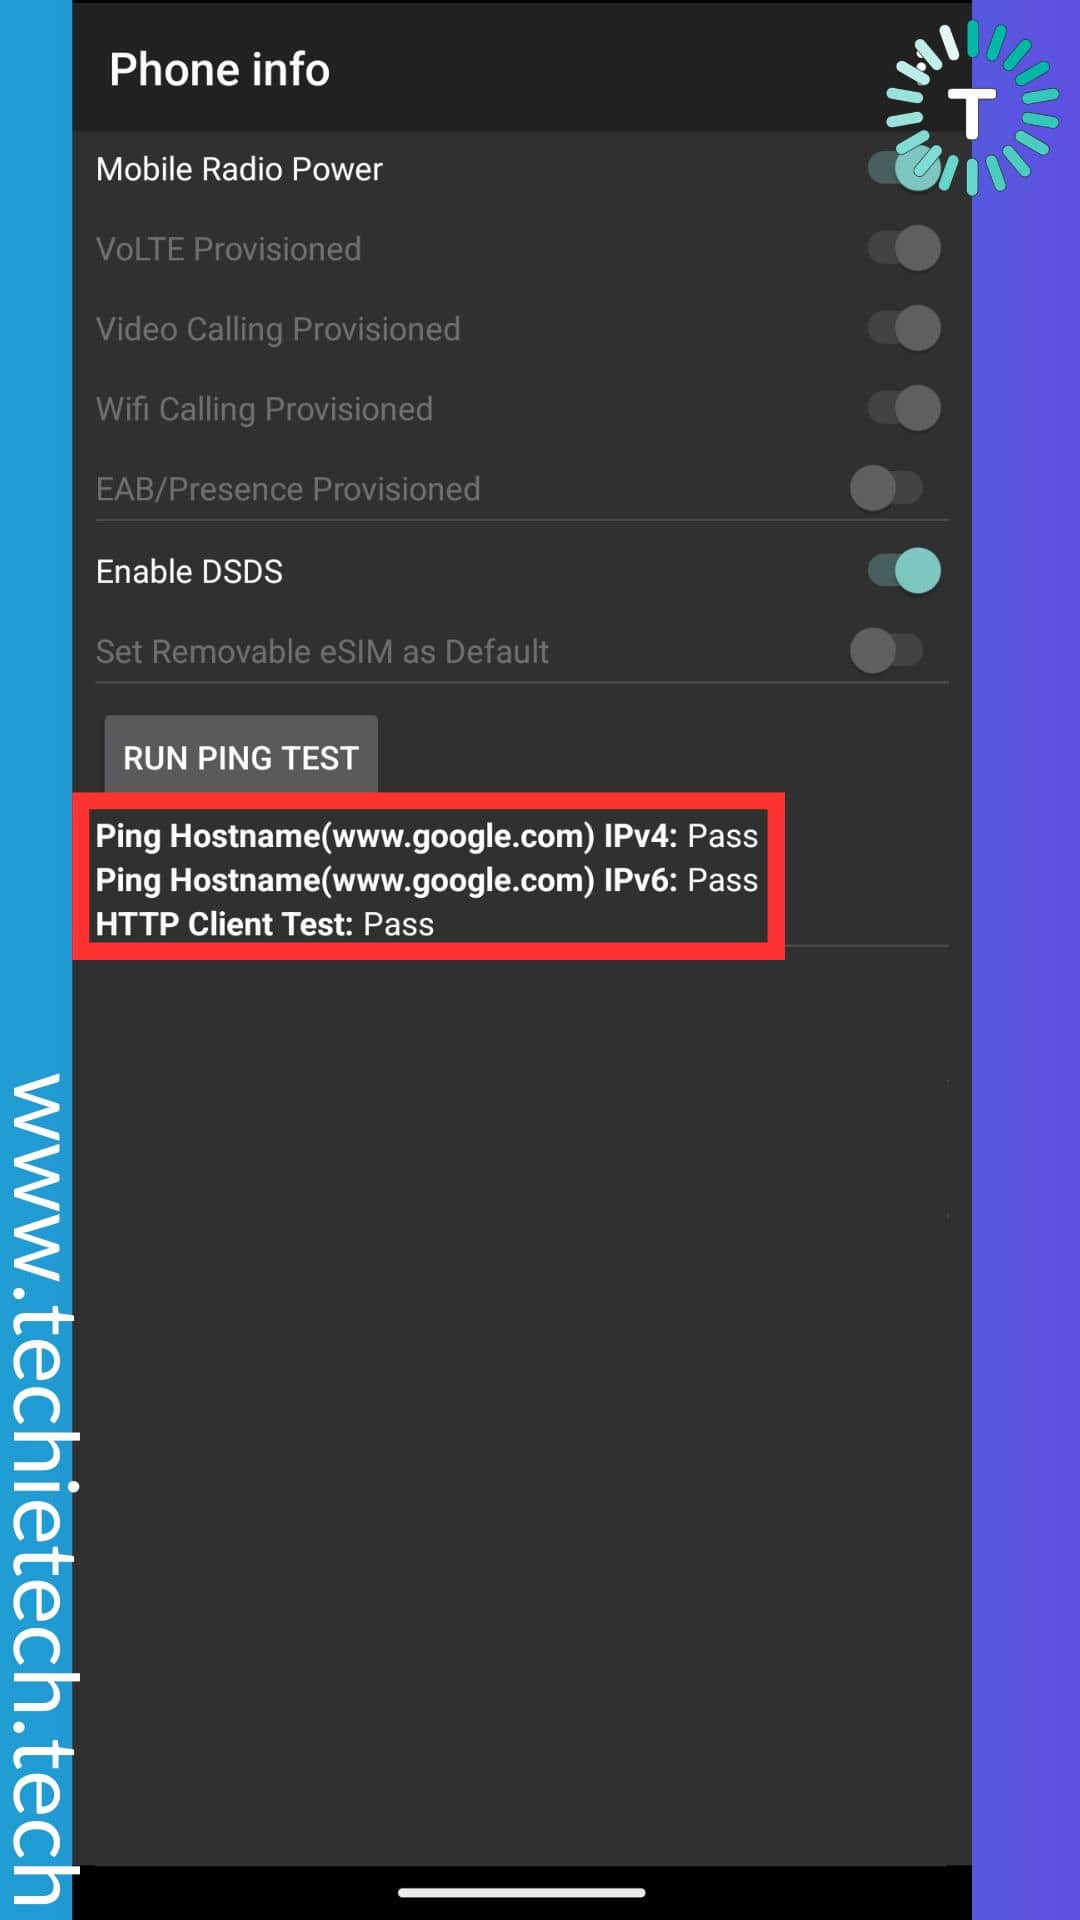 check if you can see Pass beside options placed under RUN PING TEST button